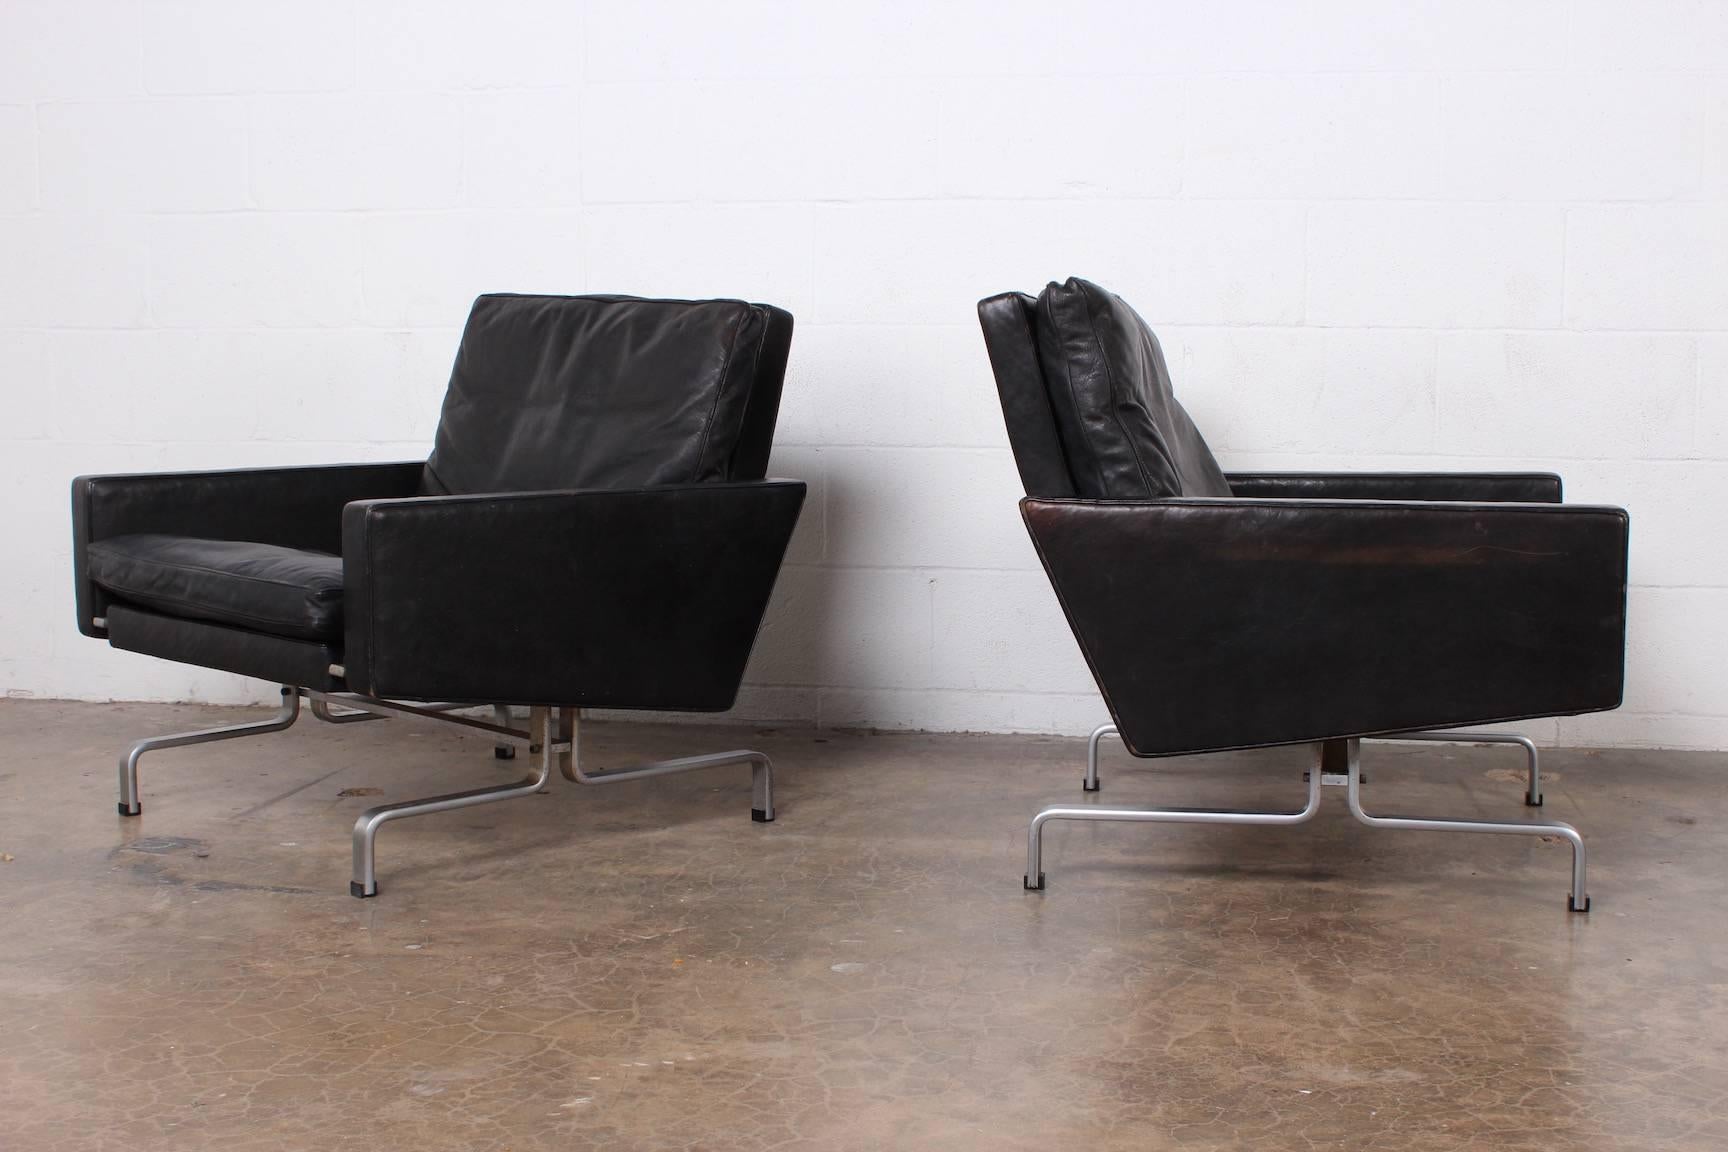 A pair of Poul Kjaerholm PK-31/1 lounge chairs for E. Kold Christensen in original black leather.